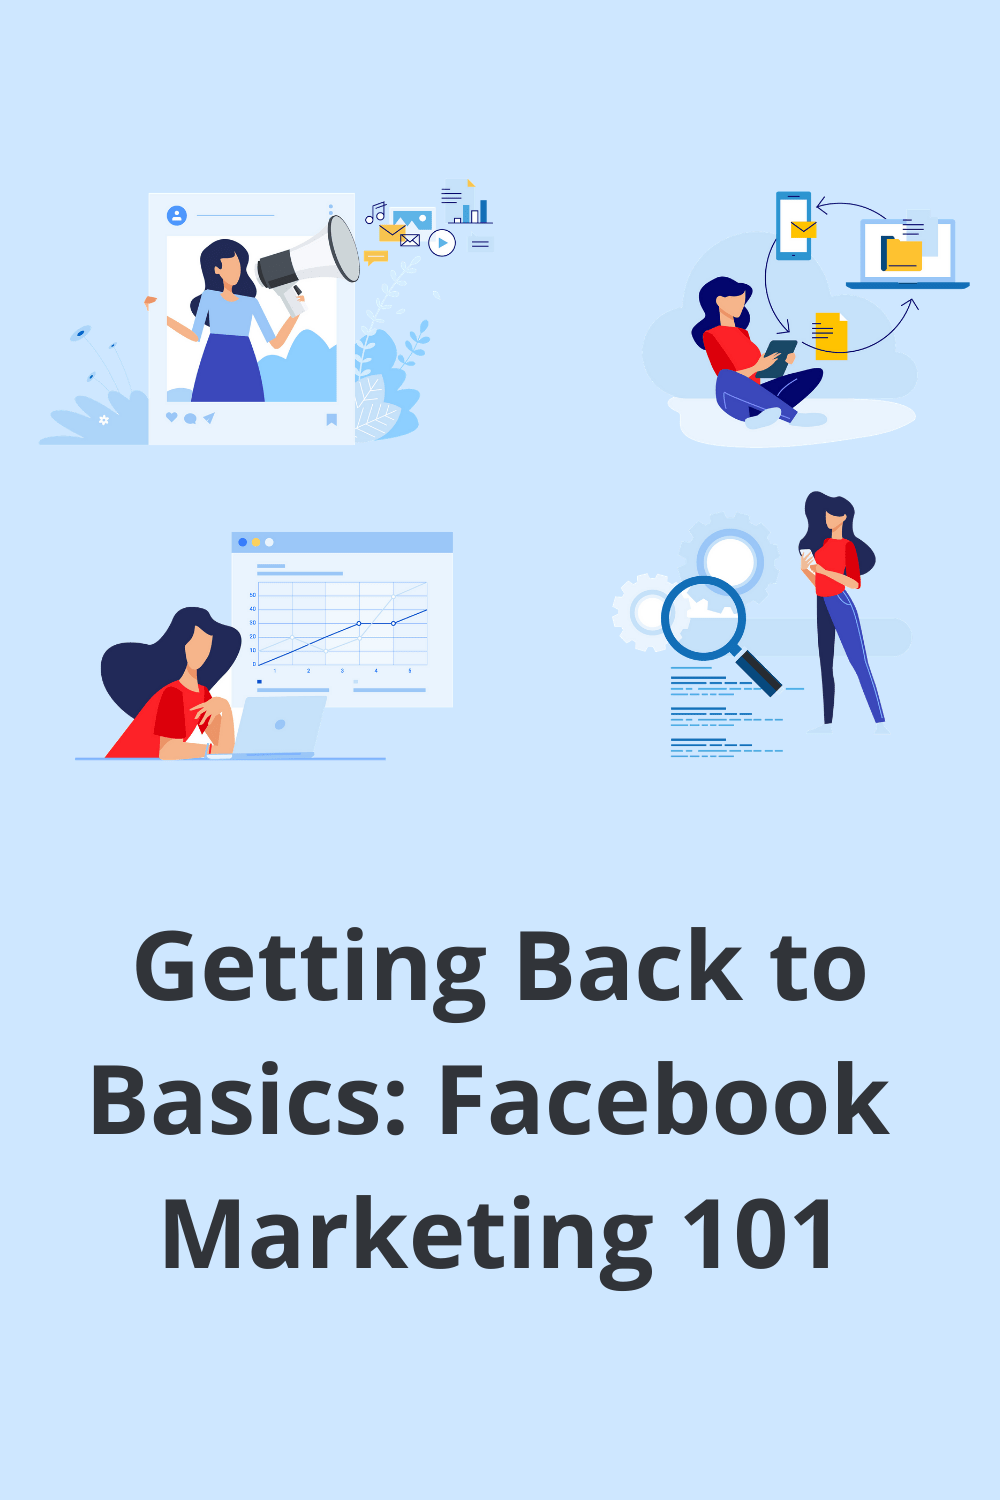 Facebook marketing is one of the easiest and most affordable ways to meet your marketing and growth goals. via @scopedesign